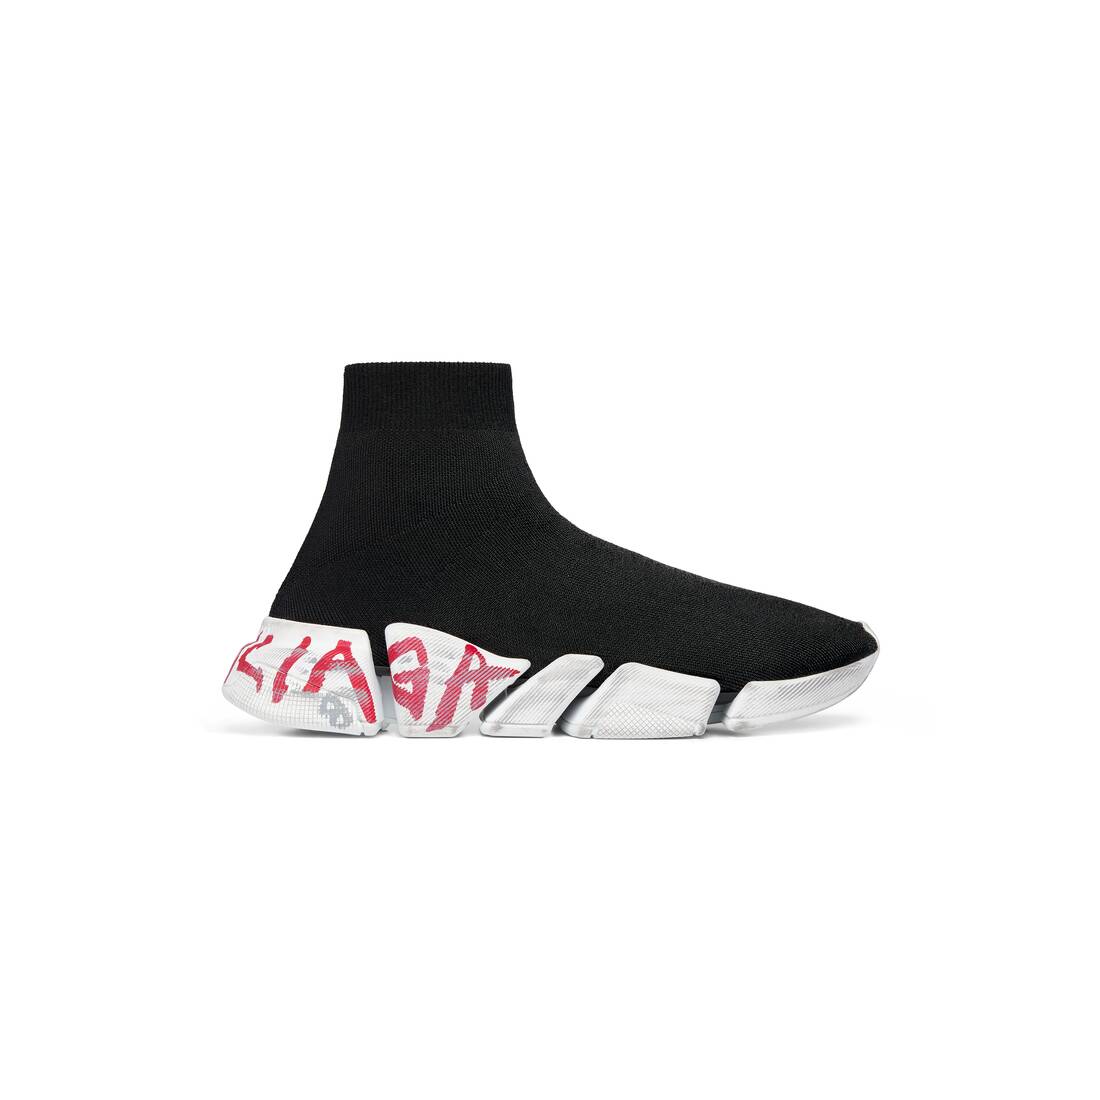 Balenciaga Recycled Speed Trainer Sneaker 'Red Black' Sz 40 / 7